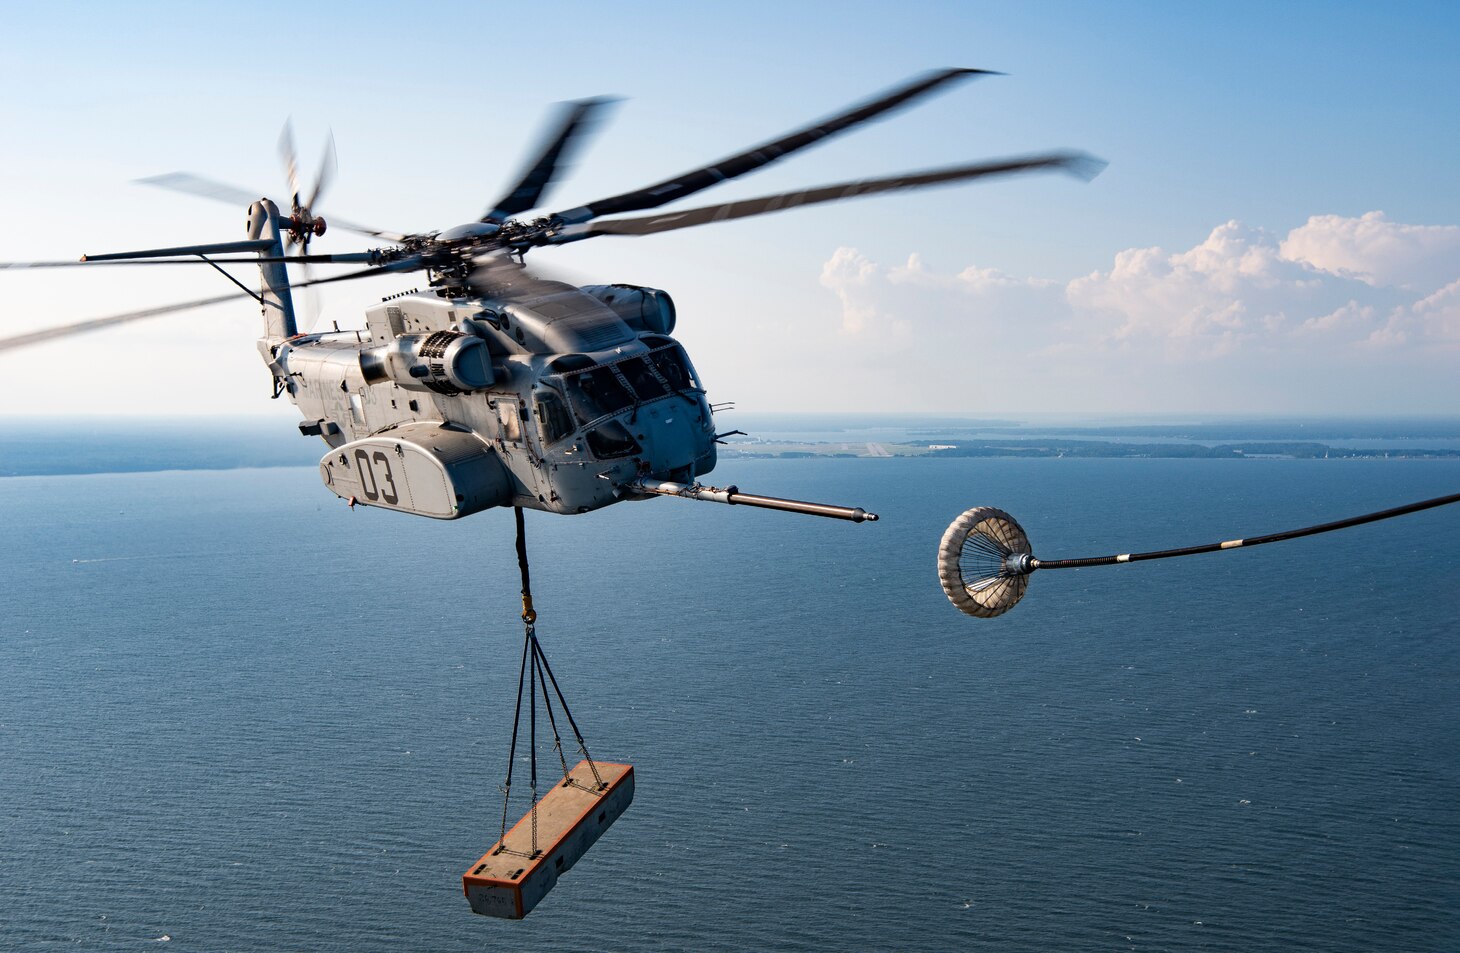 CH-53K, K3, Piloted by Mr. Rob Pupalaikis and Maj Foxton, Flies an Aerial Refueling test with an External load on 28 Sep 2020 from NAS Patuxent River, Md.